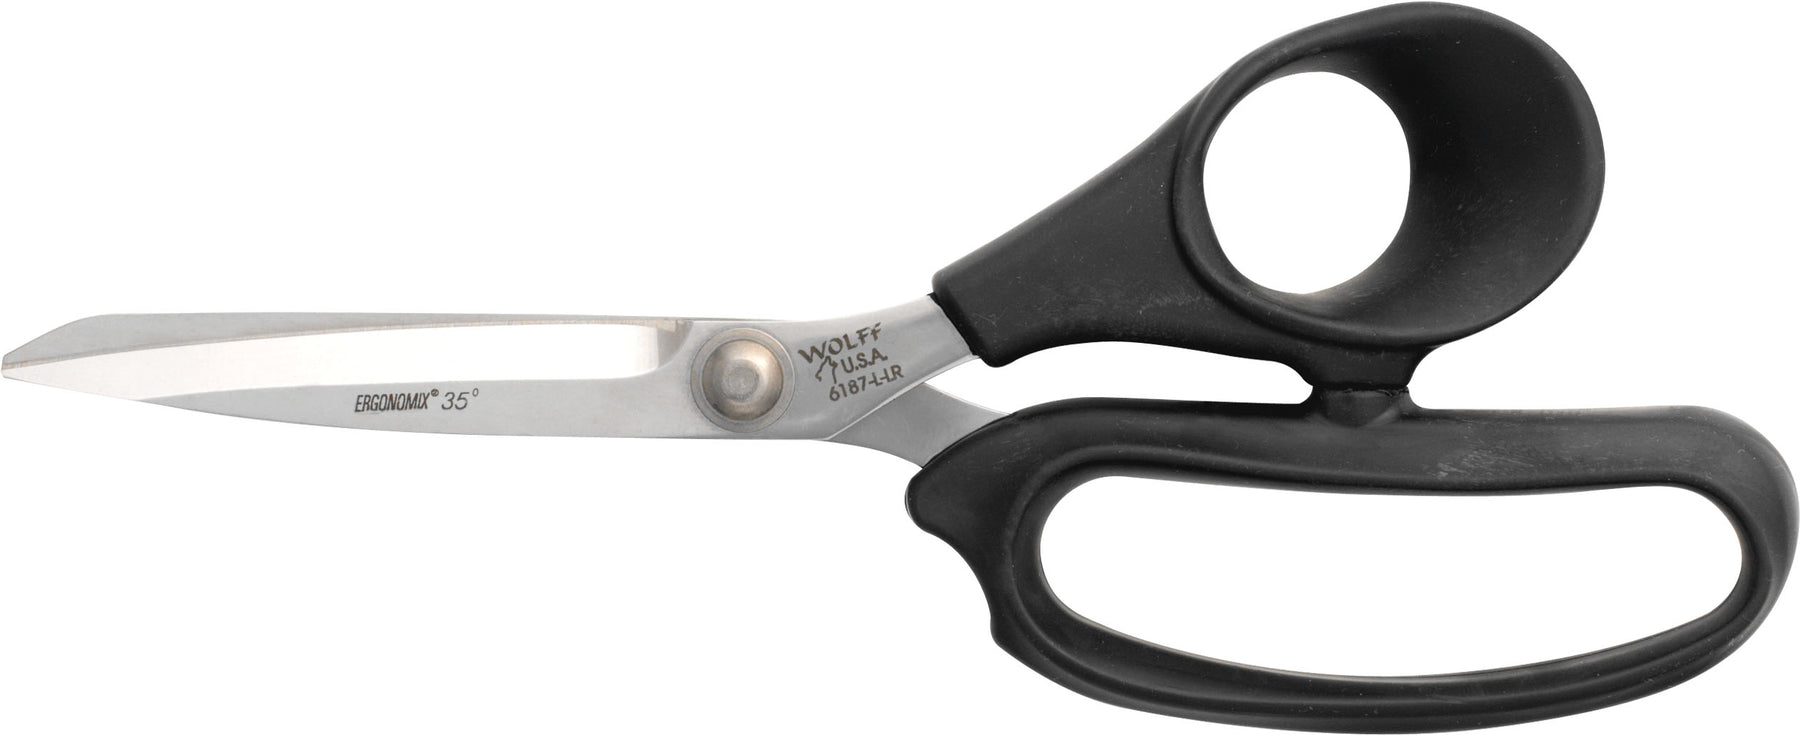 Wolff® 6187-L-LR 9" Ergonomix® Poultry Scissors - 6000 Series Stainless Steel Shears